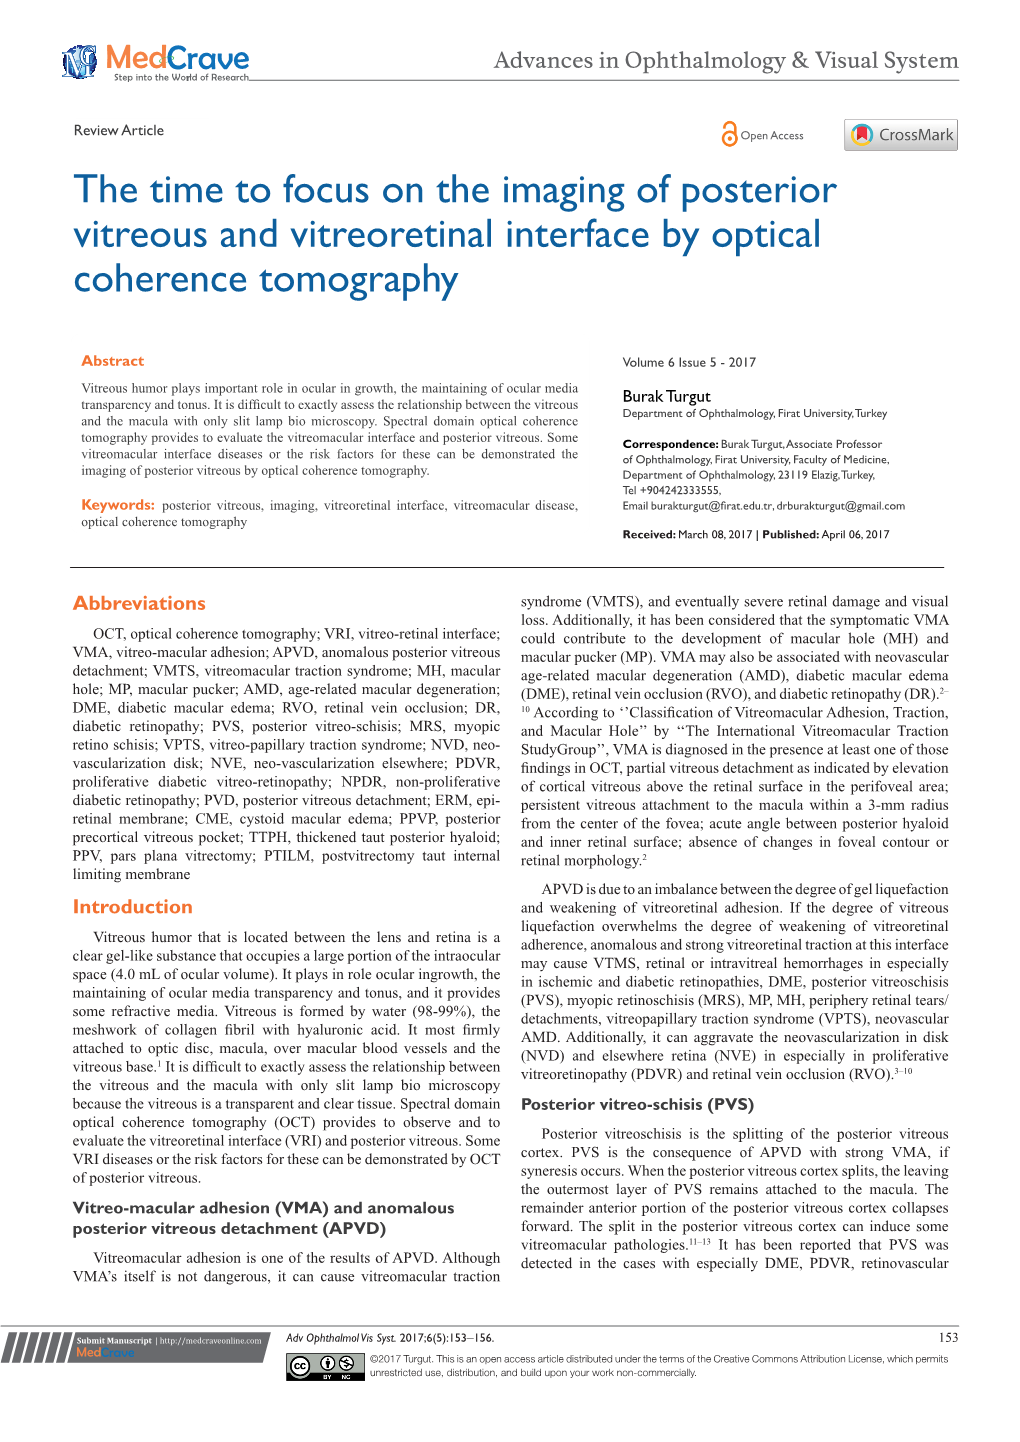 The Time to Focus on the Imaging of Posterior Vitreous and Vitreoretinal Interface by Optical Coherence Tomography